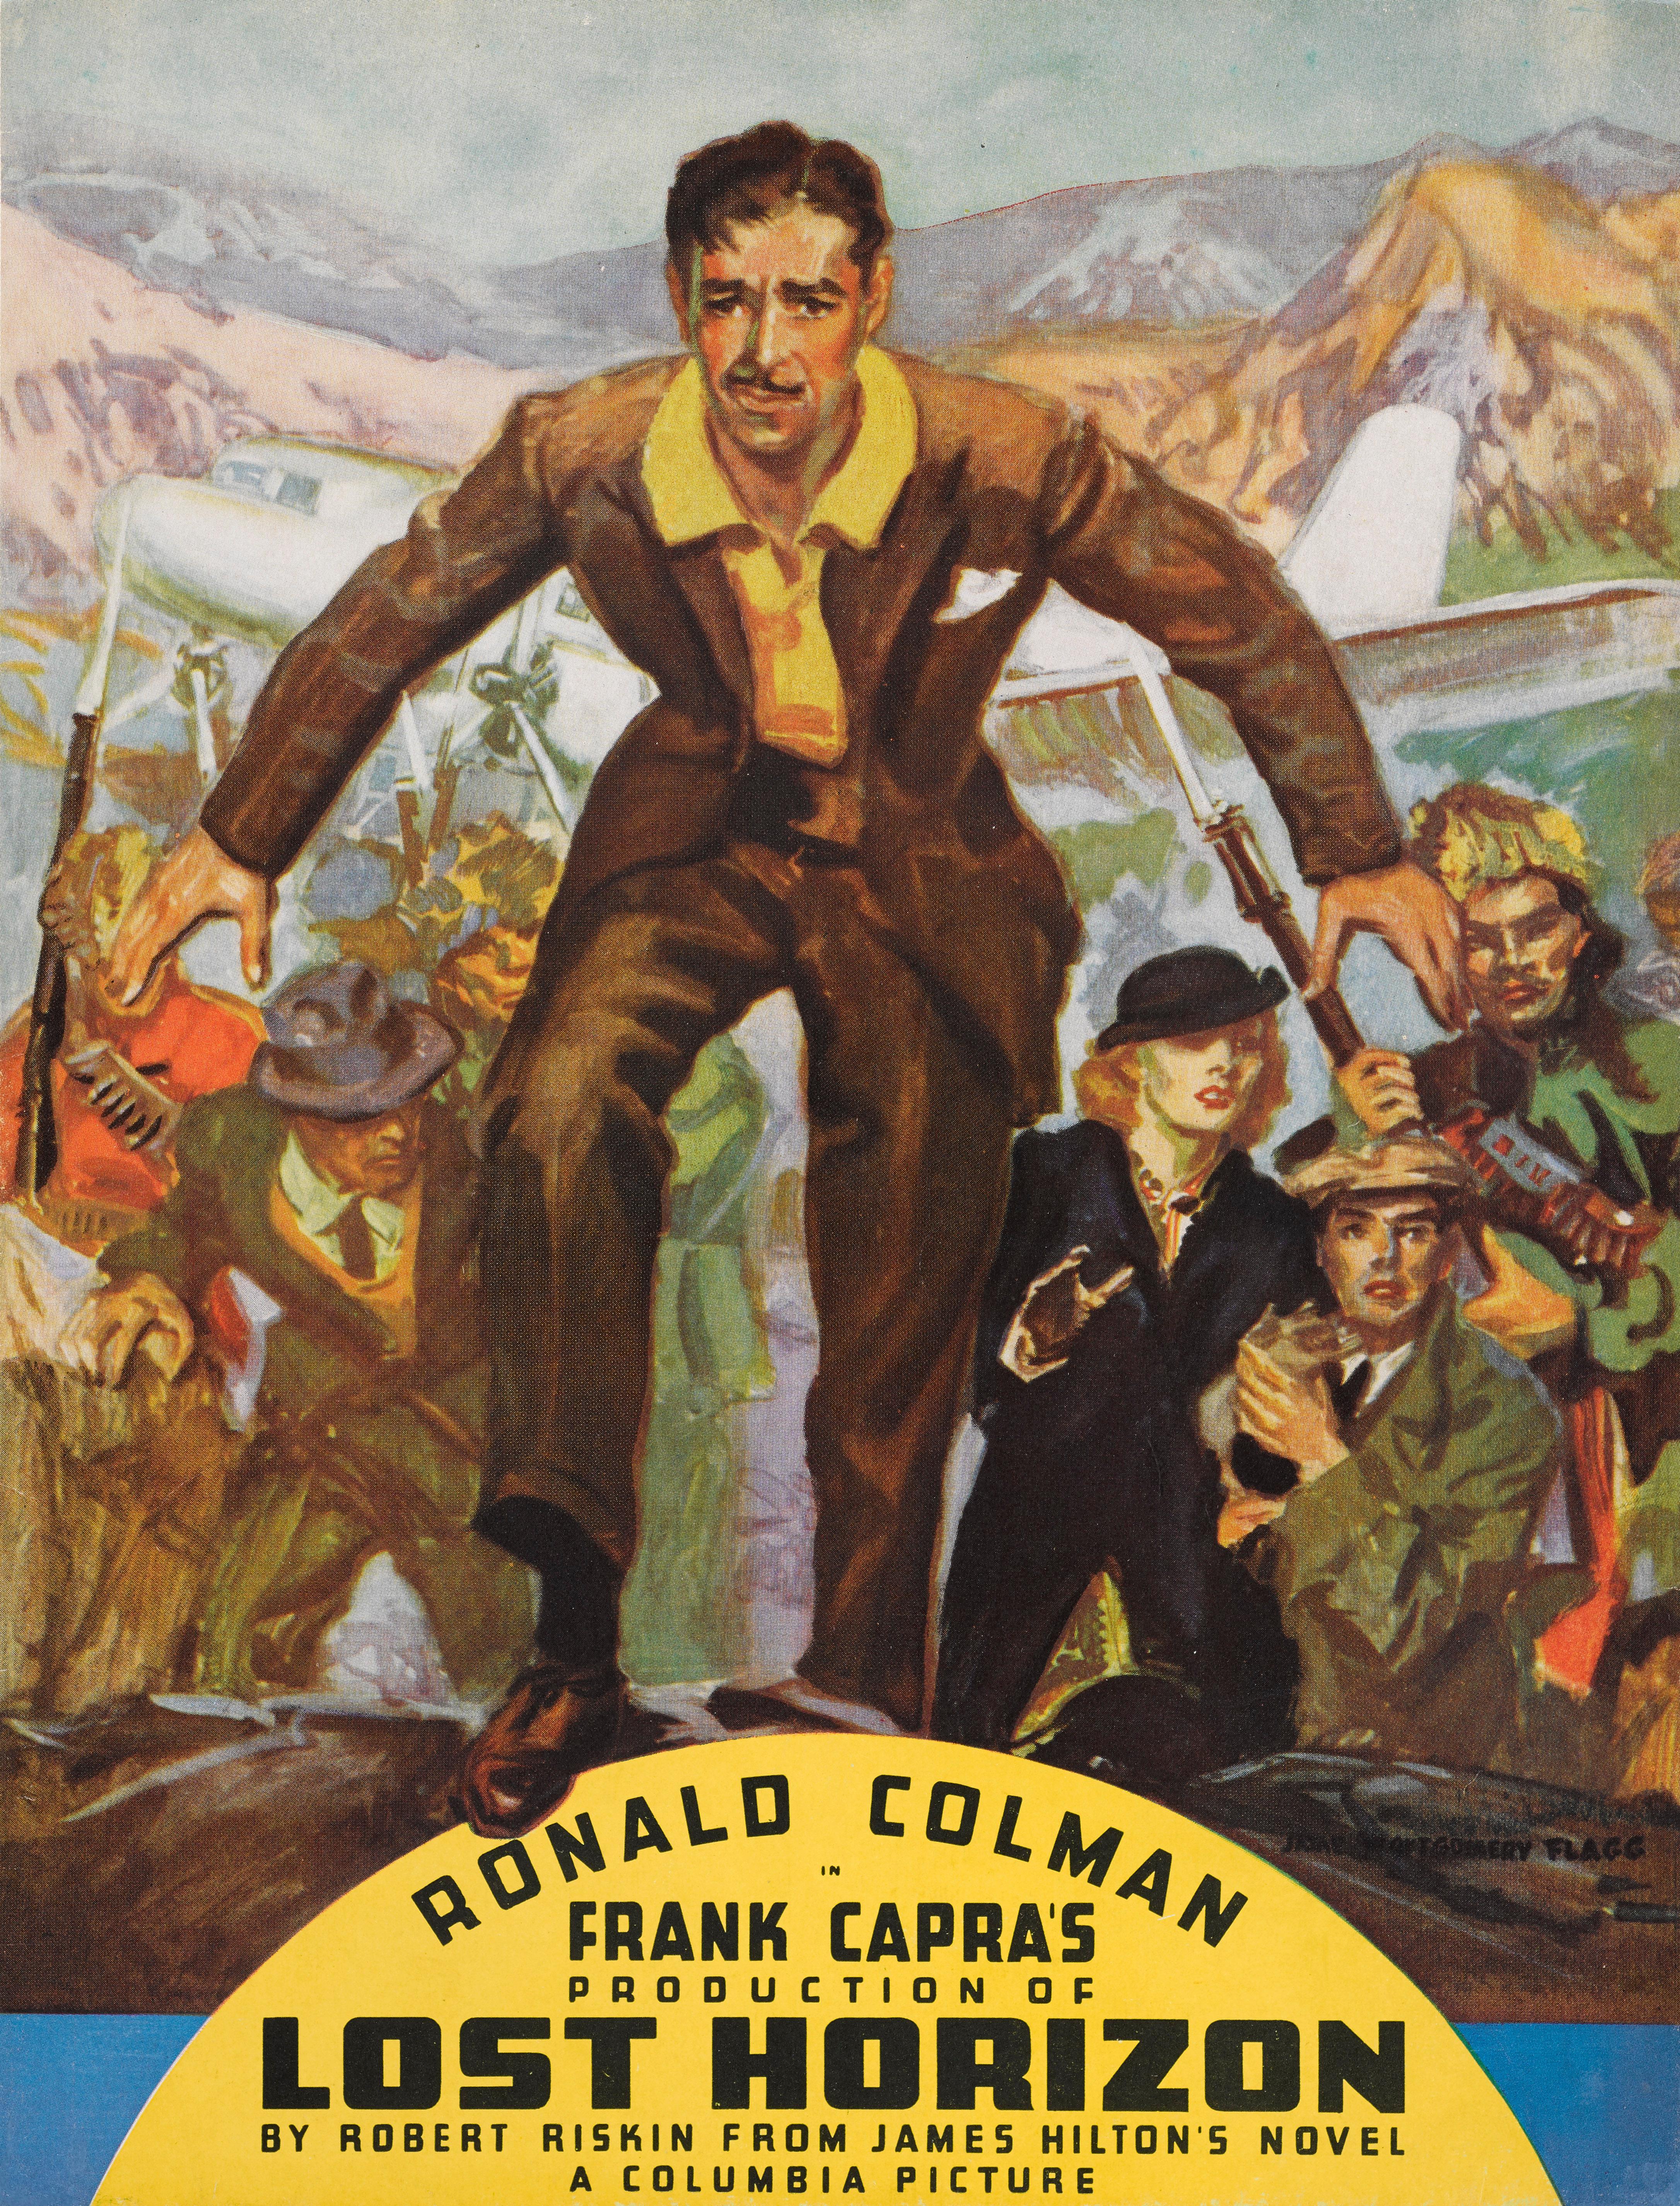 Original US program cover for Frank Capra's 1937 fantasy adventure film starring Ronald Colman, Jane Wyatt.
The artwork on this piece is by the famous American artist and illustrator James Montgomery Flagg (1877-1960) 
This piece is conservation